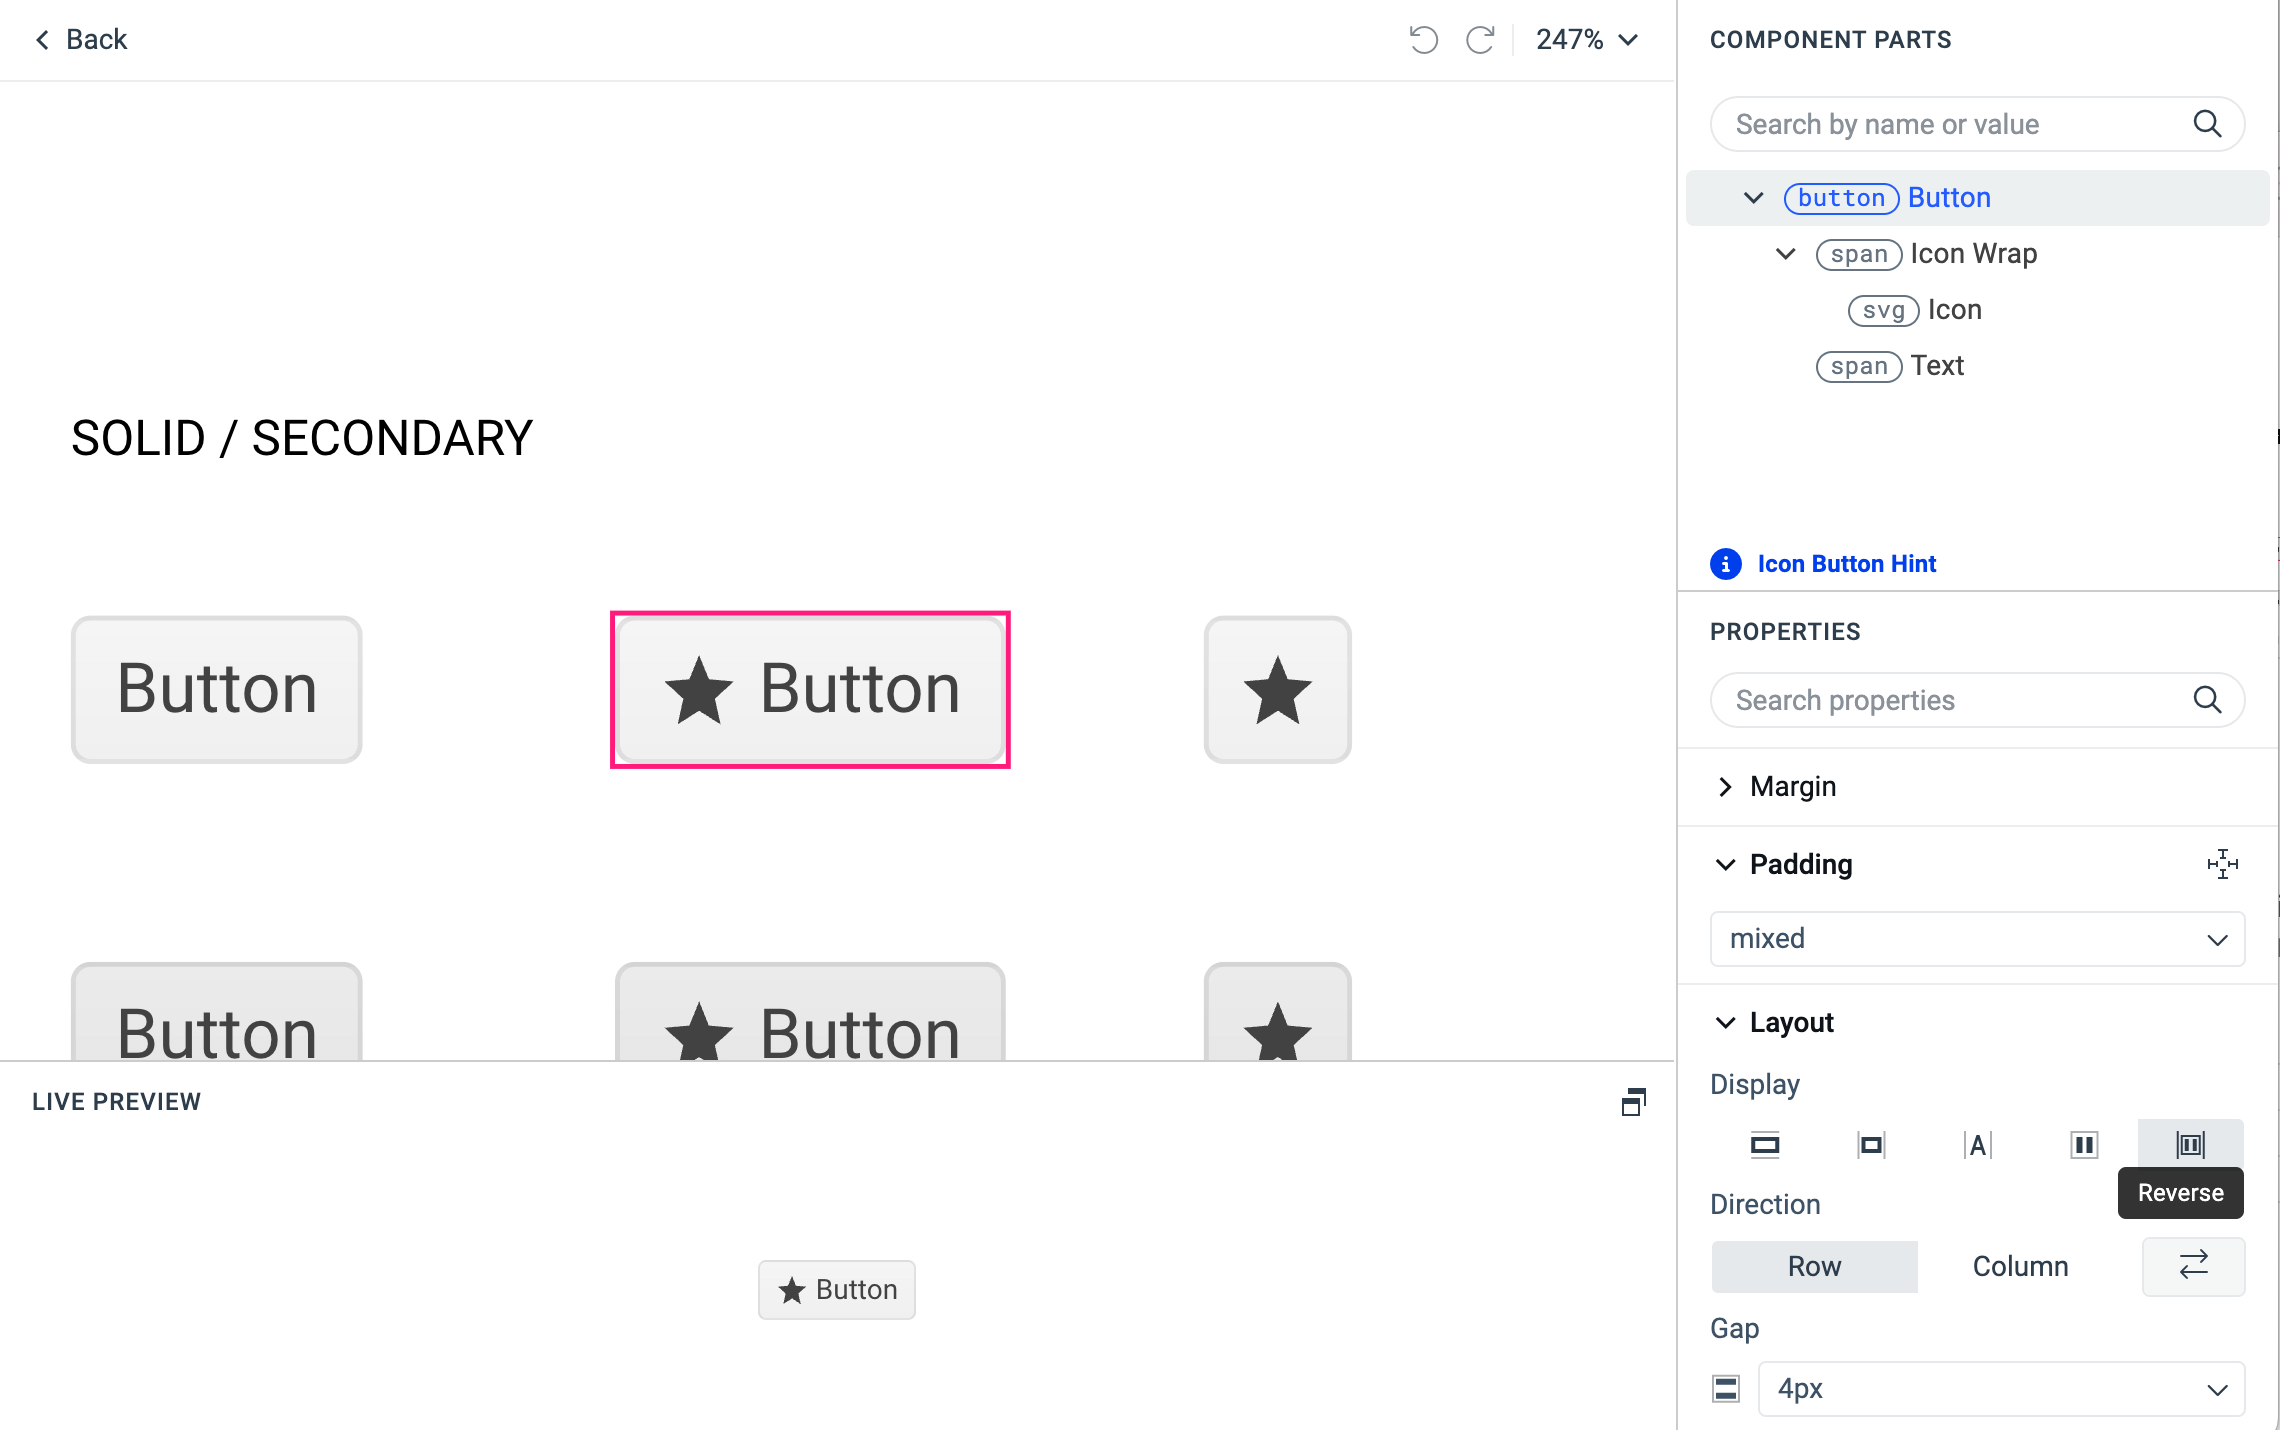 Swapping the positions of the Button text and icon